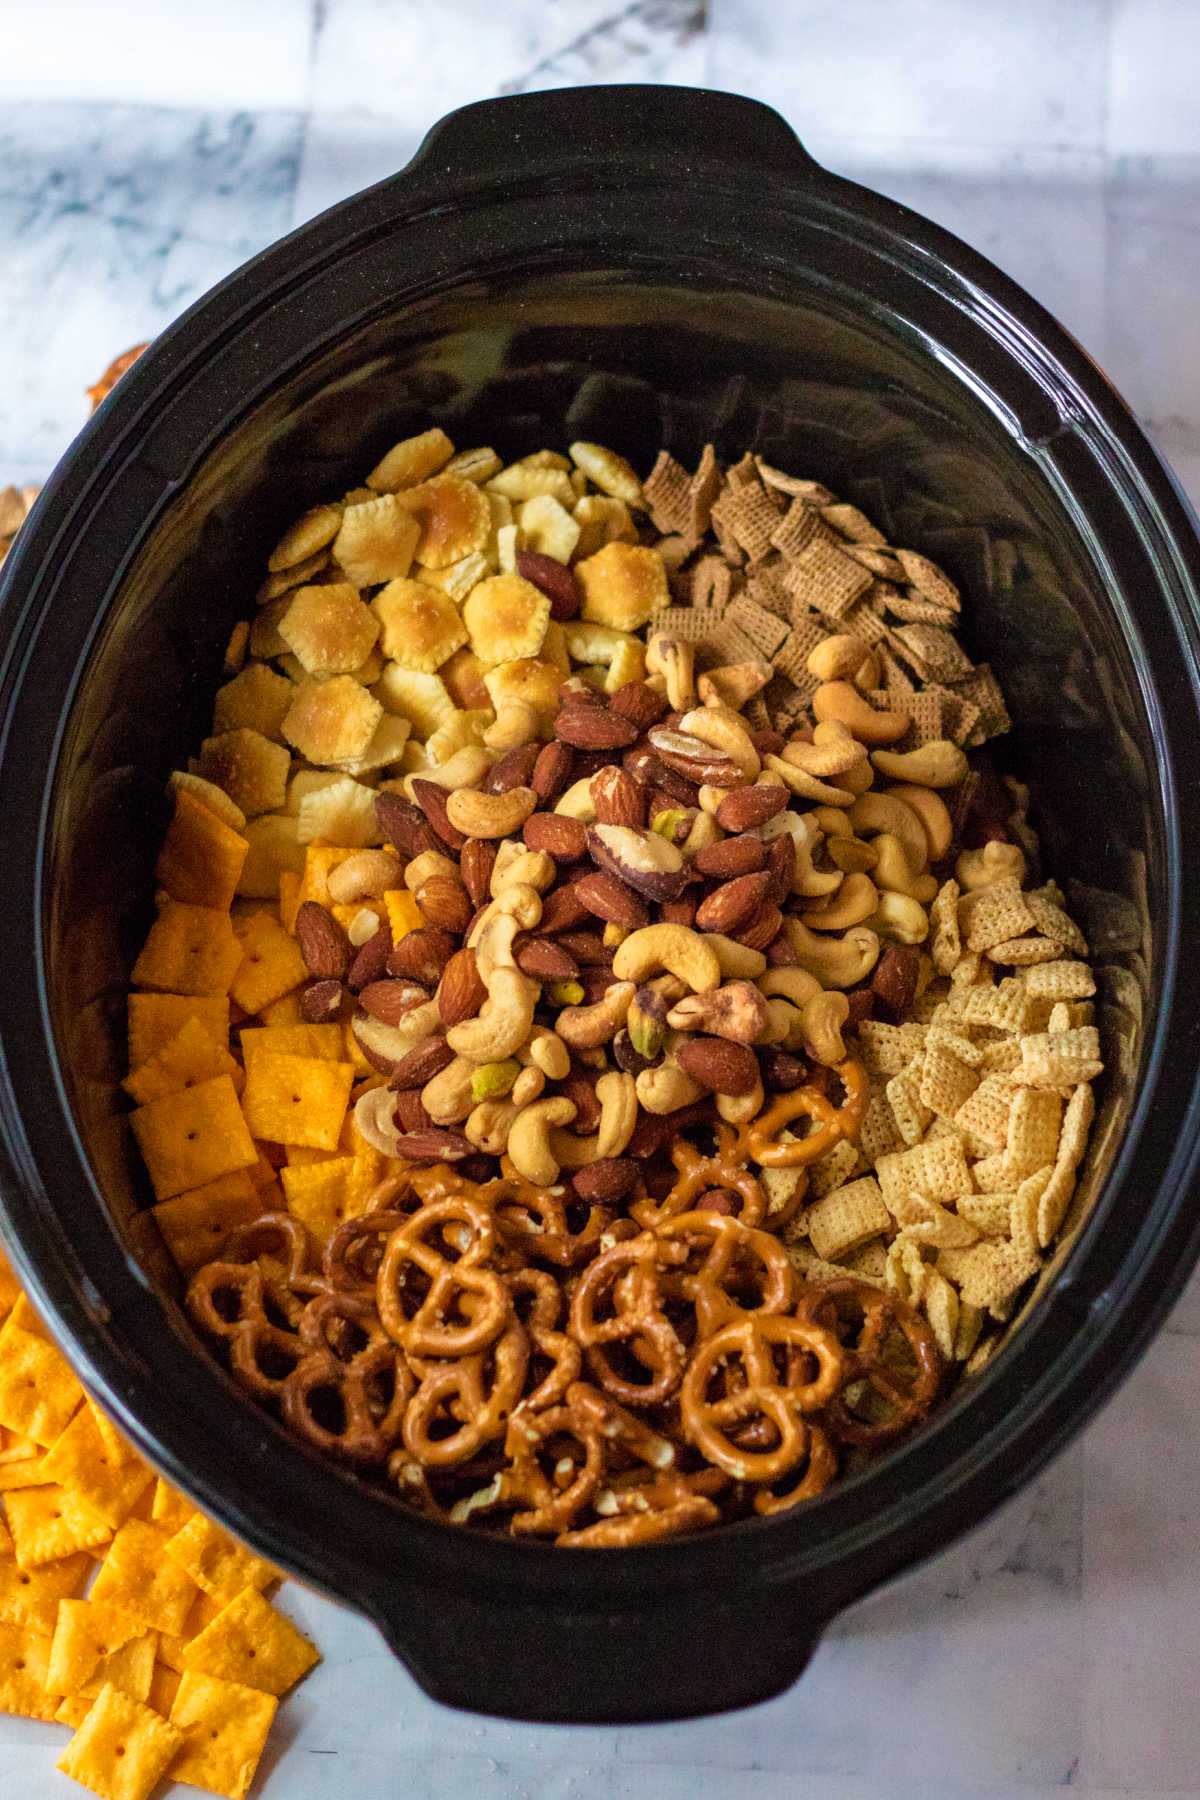 Slow cooker filled with crackers, cereal, nuts and more.